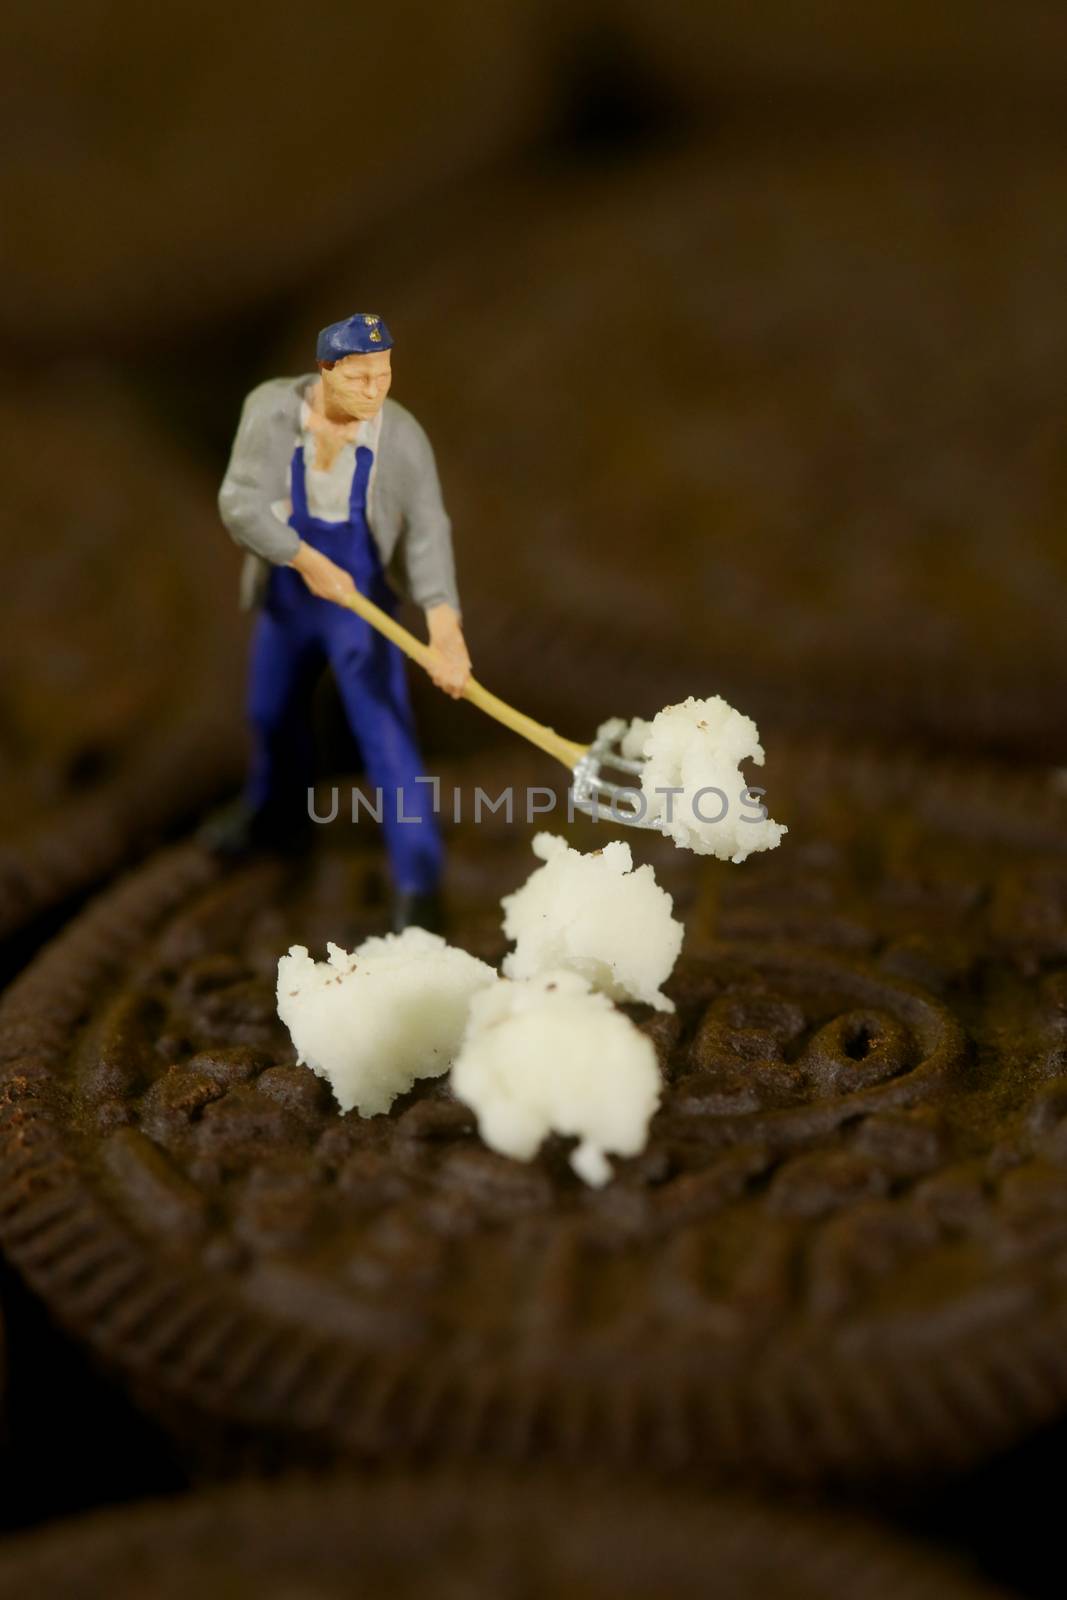 Miniature Plastic People Cleaning Up a Messy Cookie